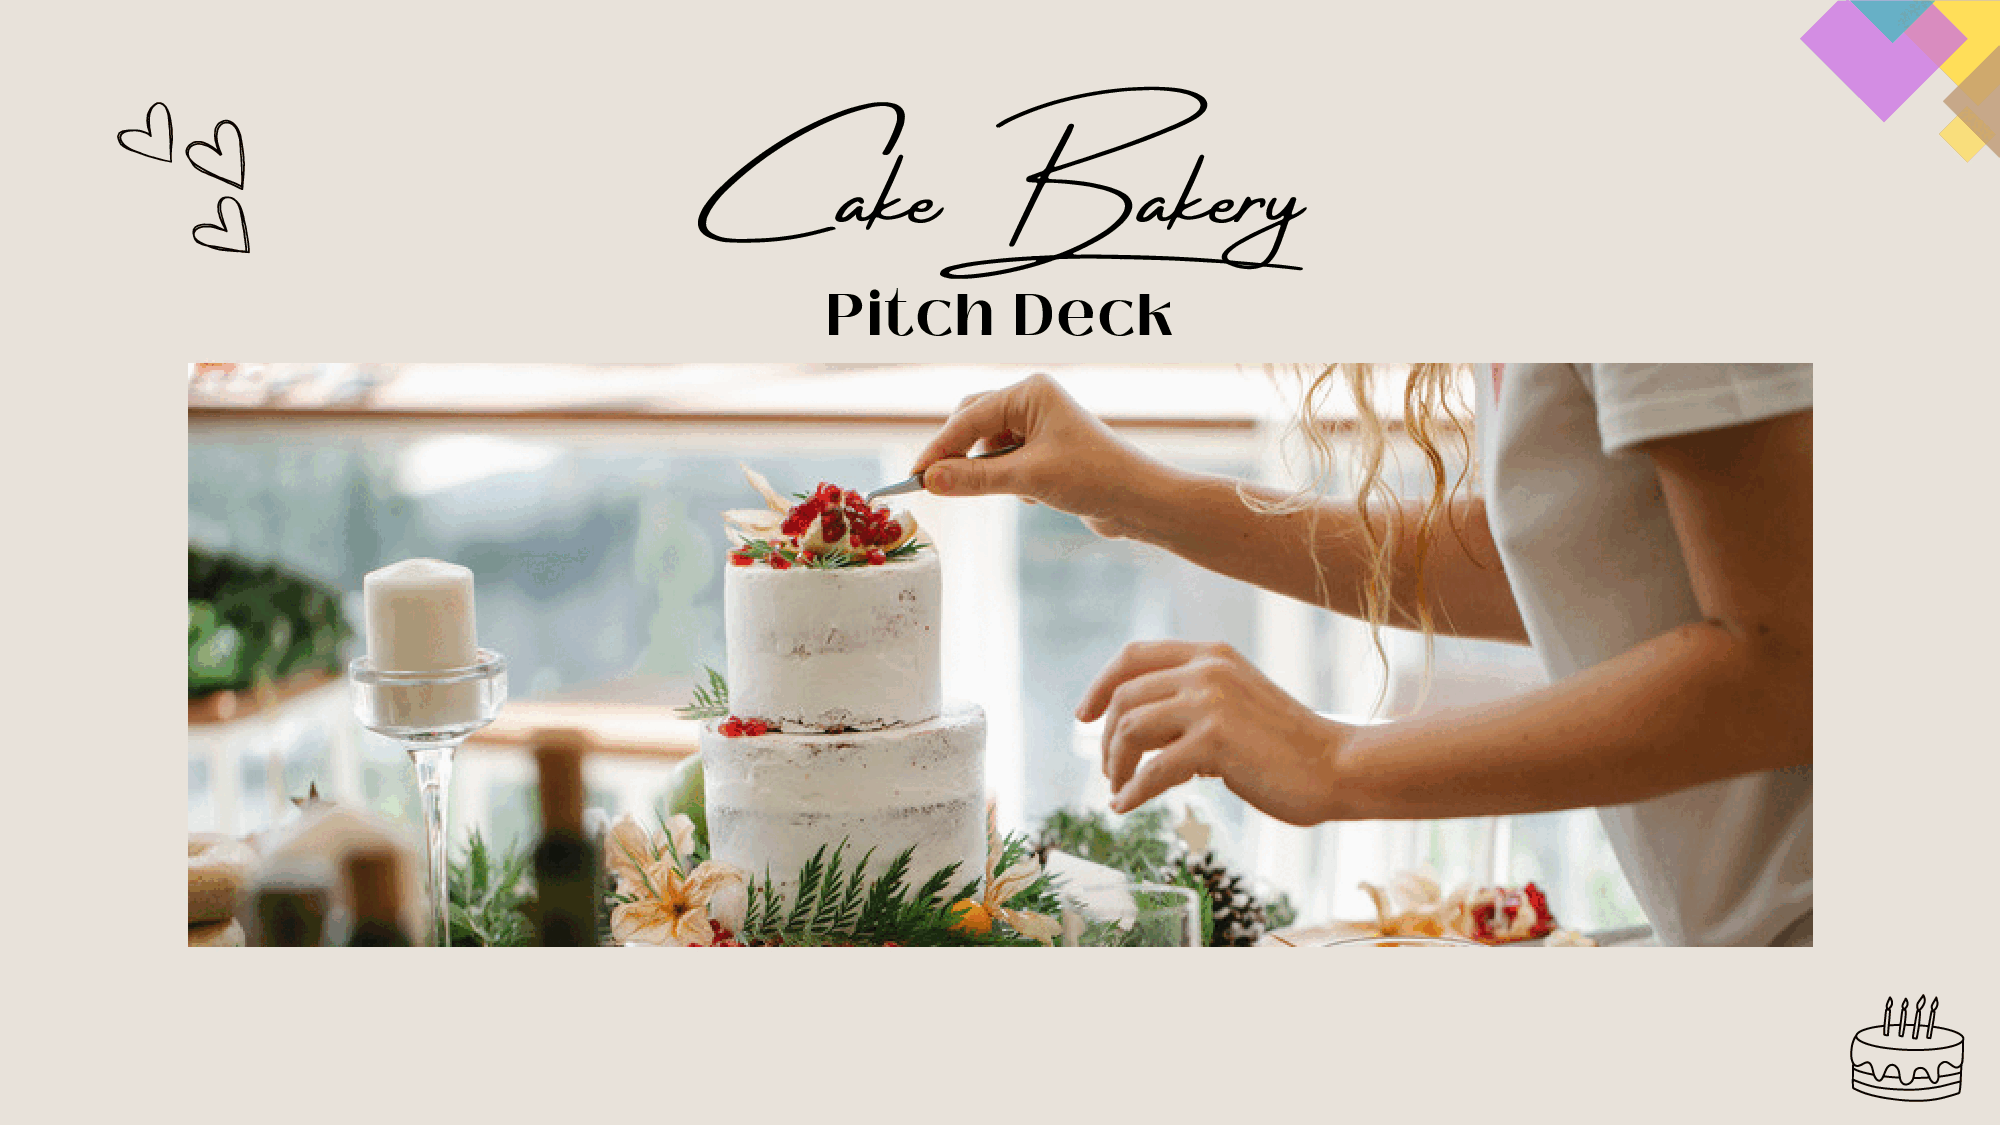 Cake Bakery Pitch Deck Template